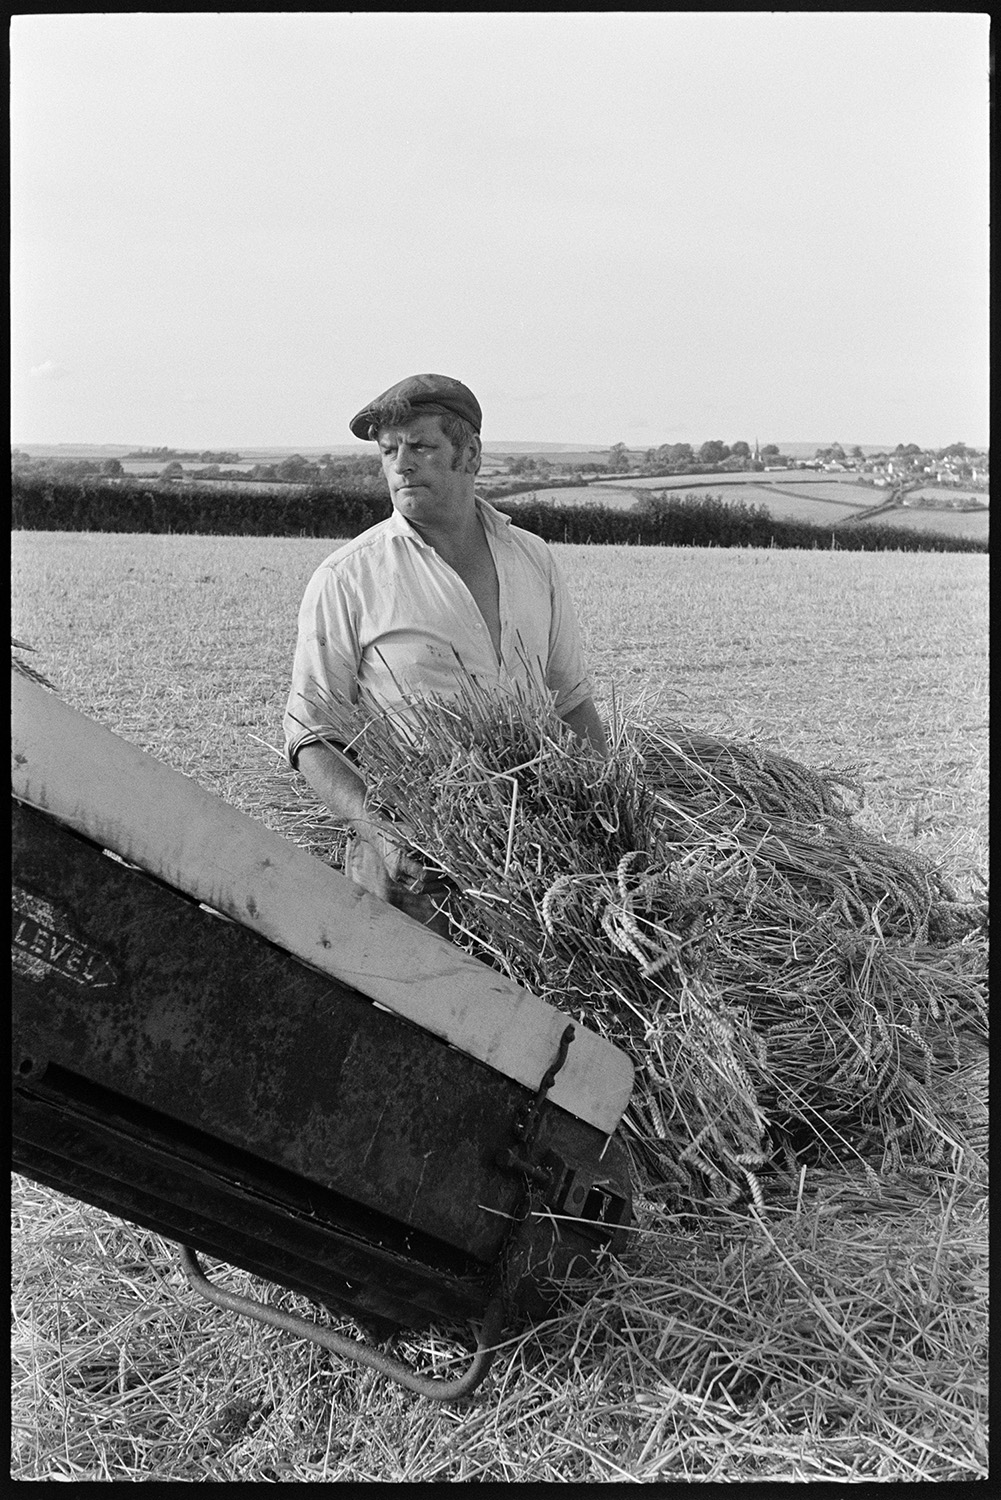 Reedcombers having tea break and working reed comber. 
[A man, possibly from the Down family, loading an elevator with bundles of reed to be transported to a reed comber, in a field at Spittle Farm, Chulmleigh.